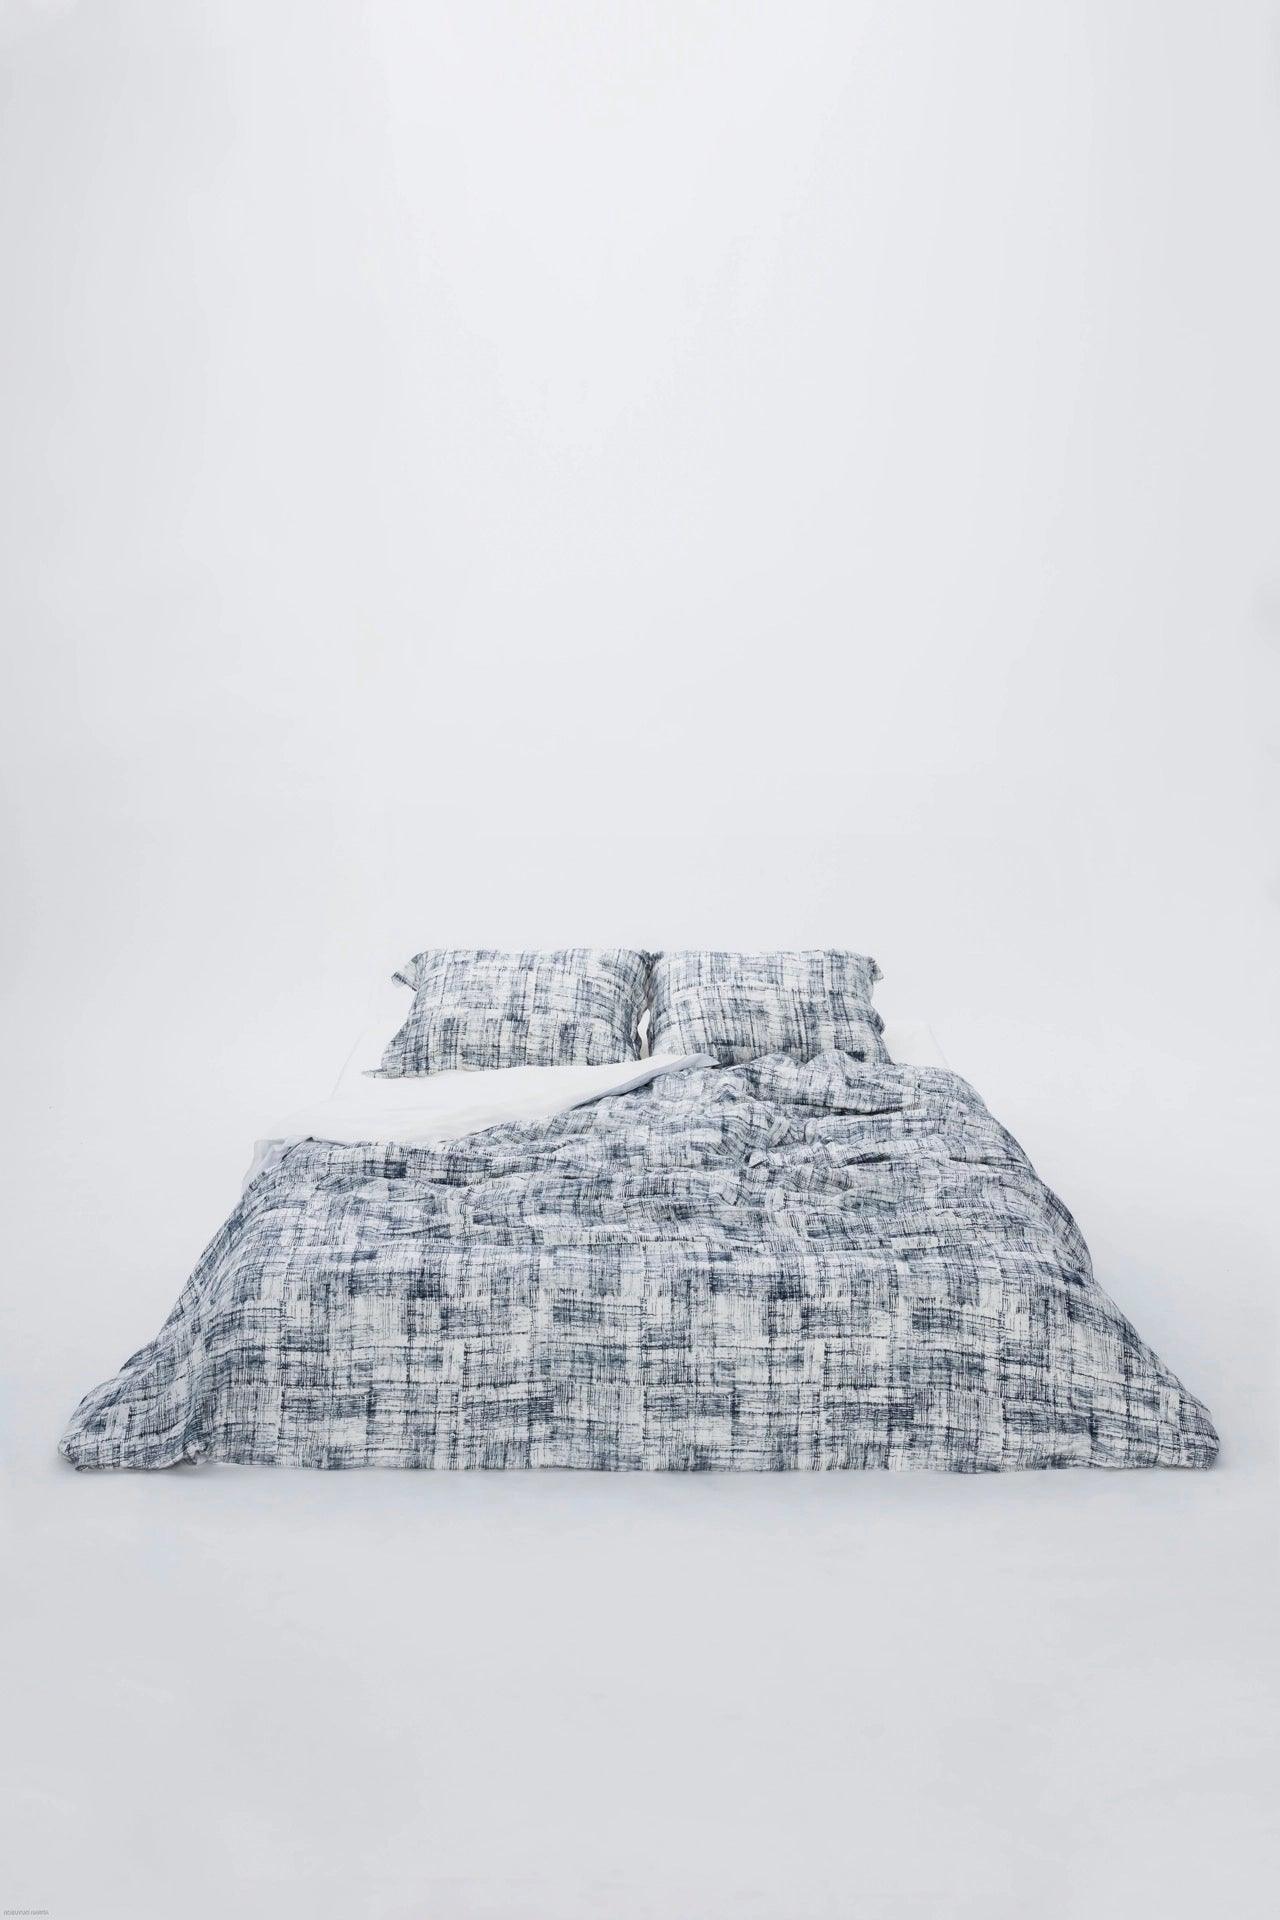 Abstract Line Drawing Print Duvet Set - NOT LABELED